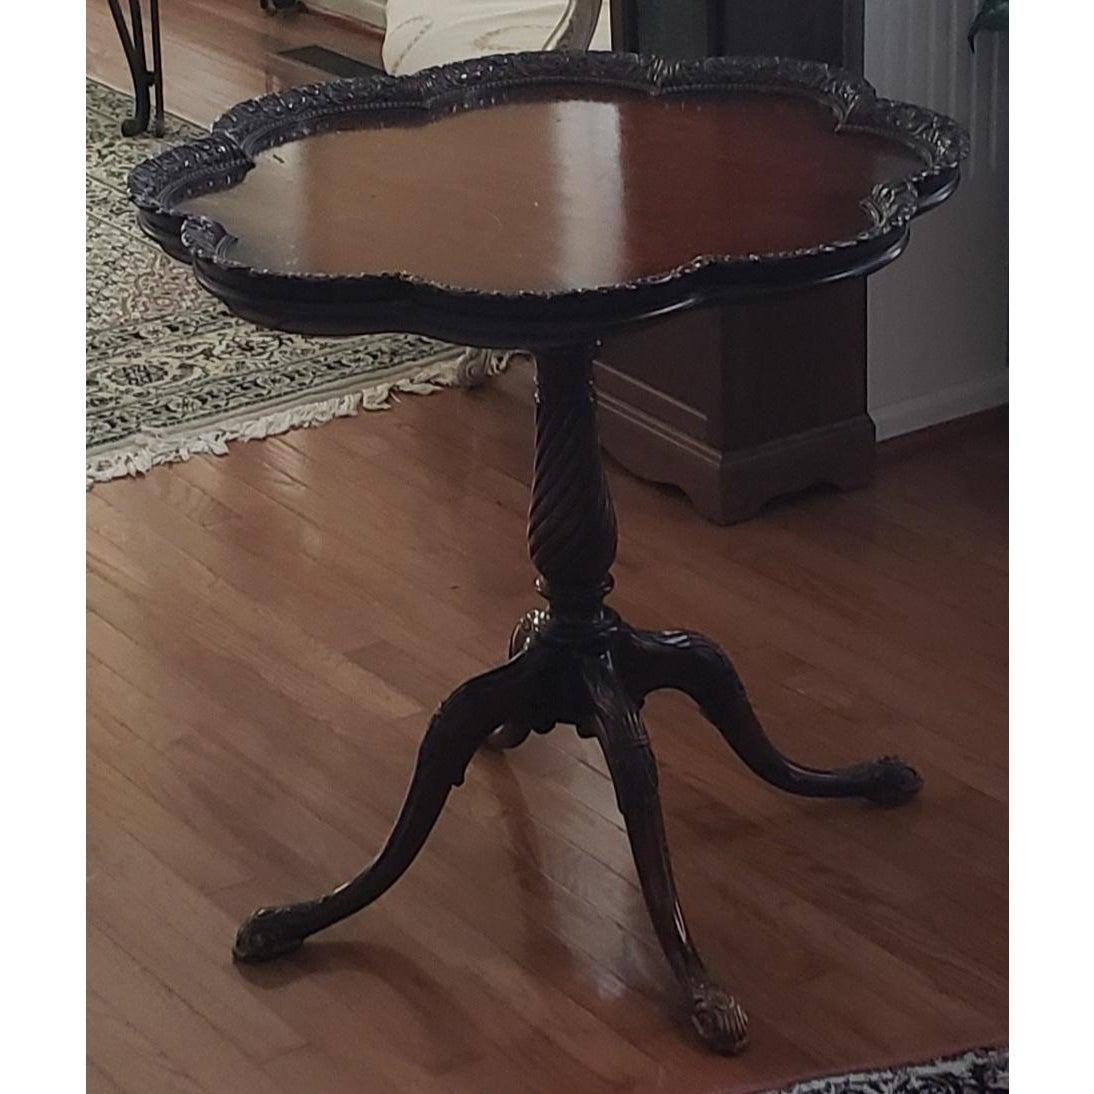 Antique mahogany piecrust tripod table / Victorian lamp table : Tripod table - antique occasional table - antique lamp table - lamp table, Tripod table
Victorian mahogany piecrust tripod table, solid top with carved piecrust edge, raised on a